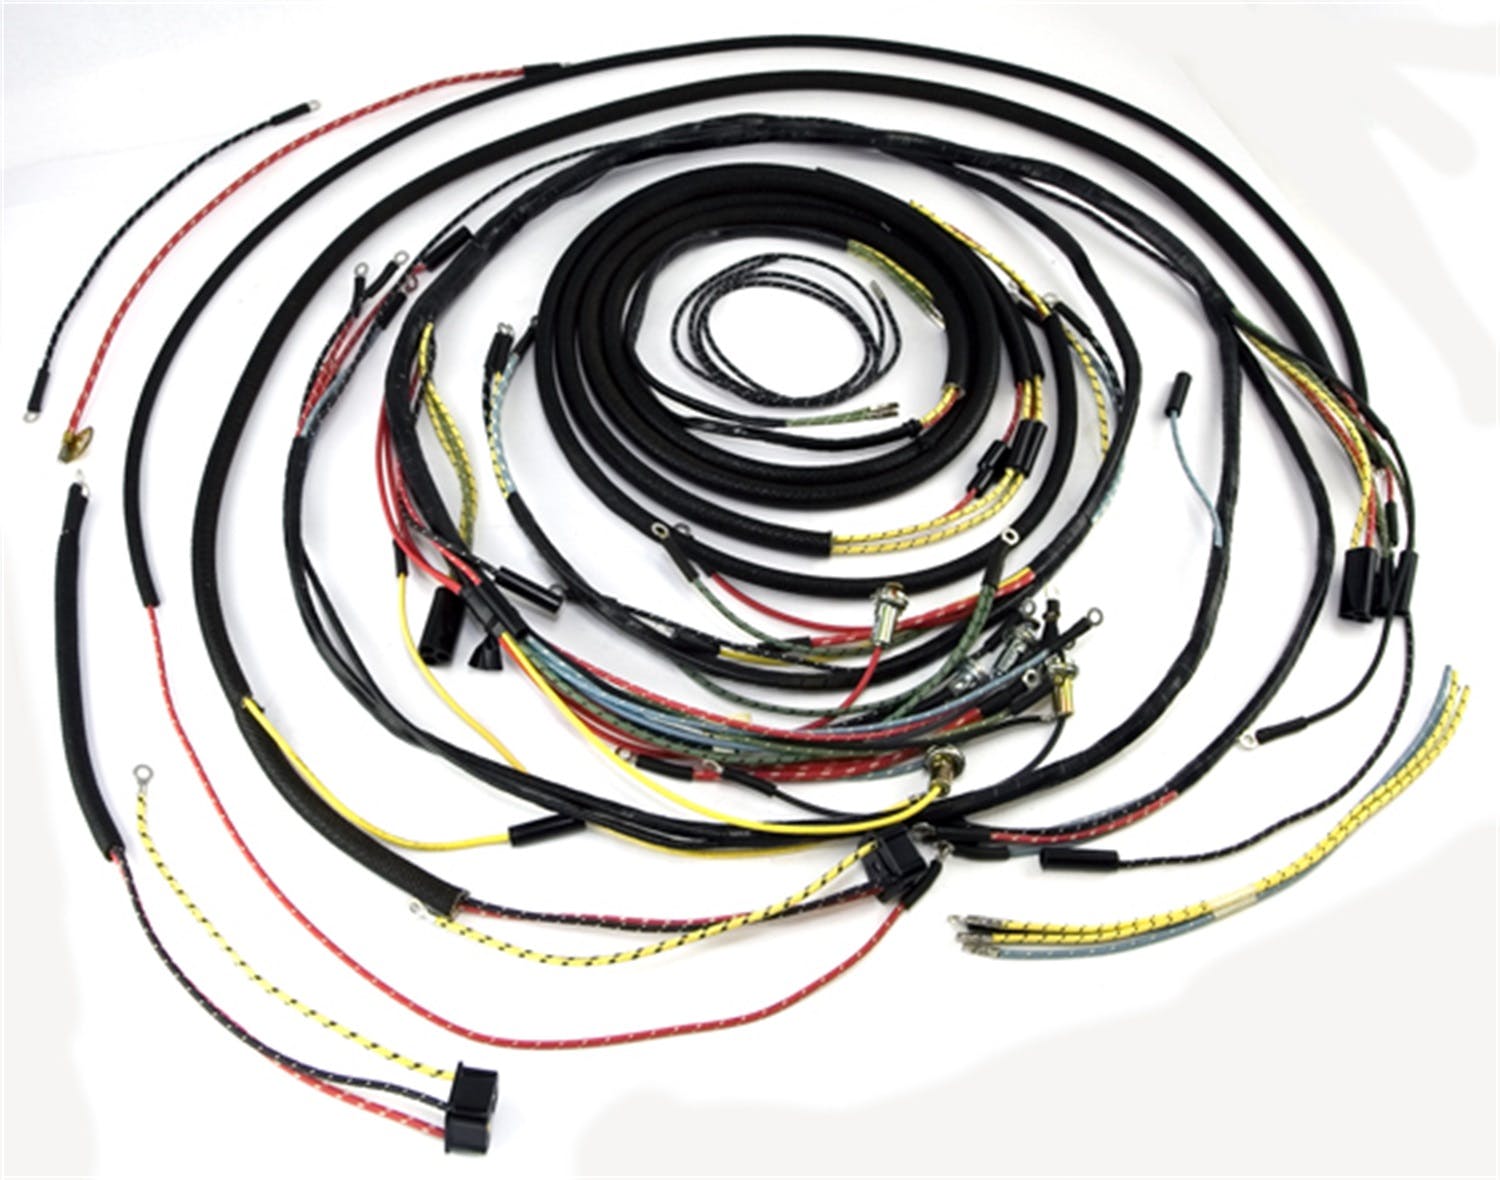 Omix-ADA 17201.09 Compete Wiring Harness with Cloth Wire Cover